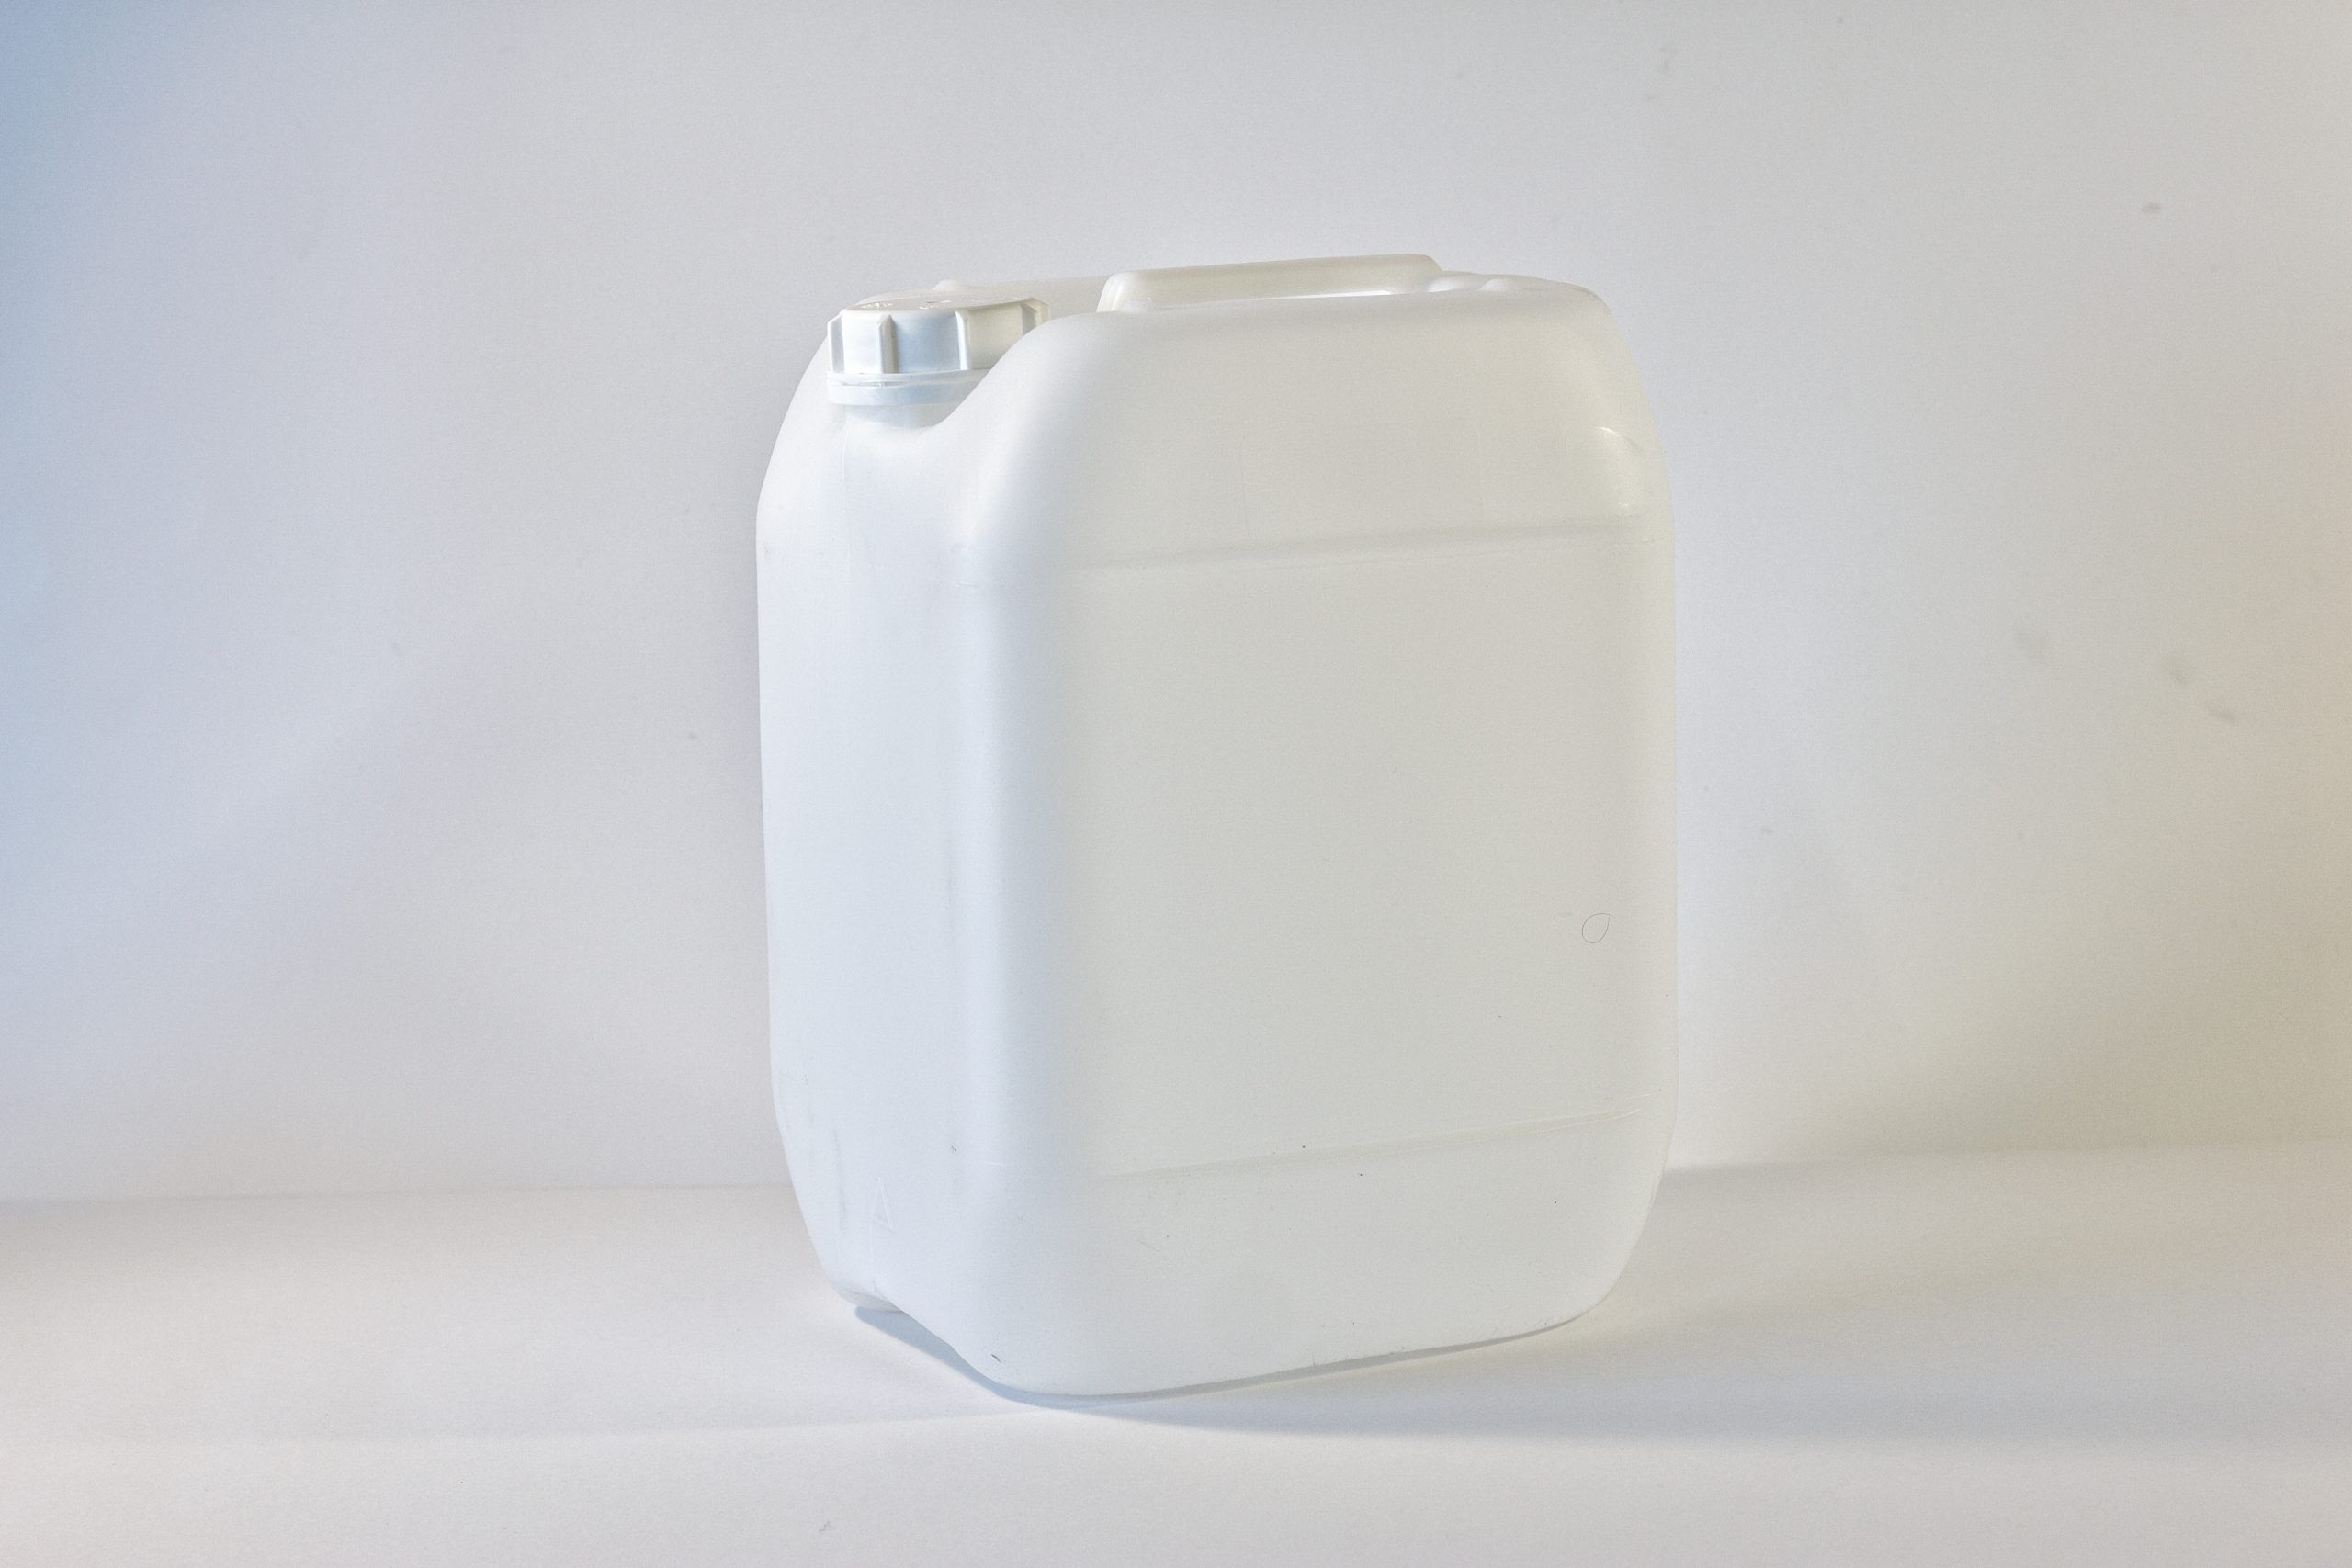 10 litre Plastic jerrycan/drum with tamper evident lid and built in handle. Food grade packaging perfect for water sampling, oils, chemicals and industrial use. From our Plastic Packaging range.